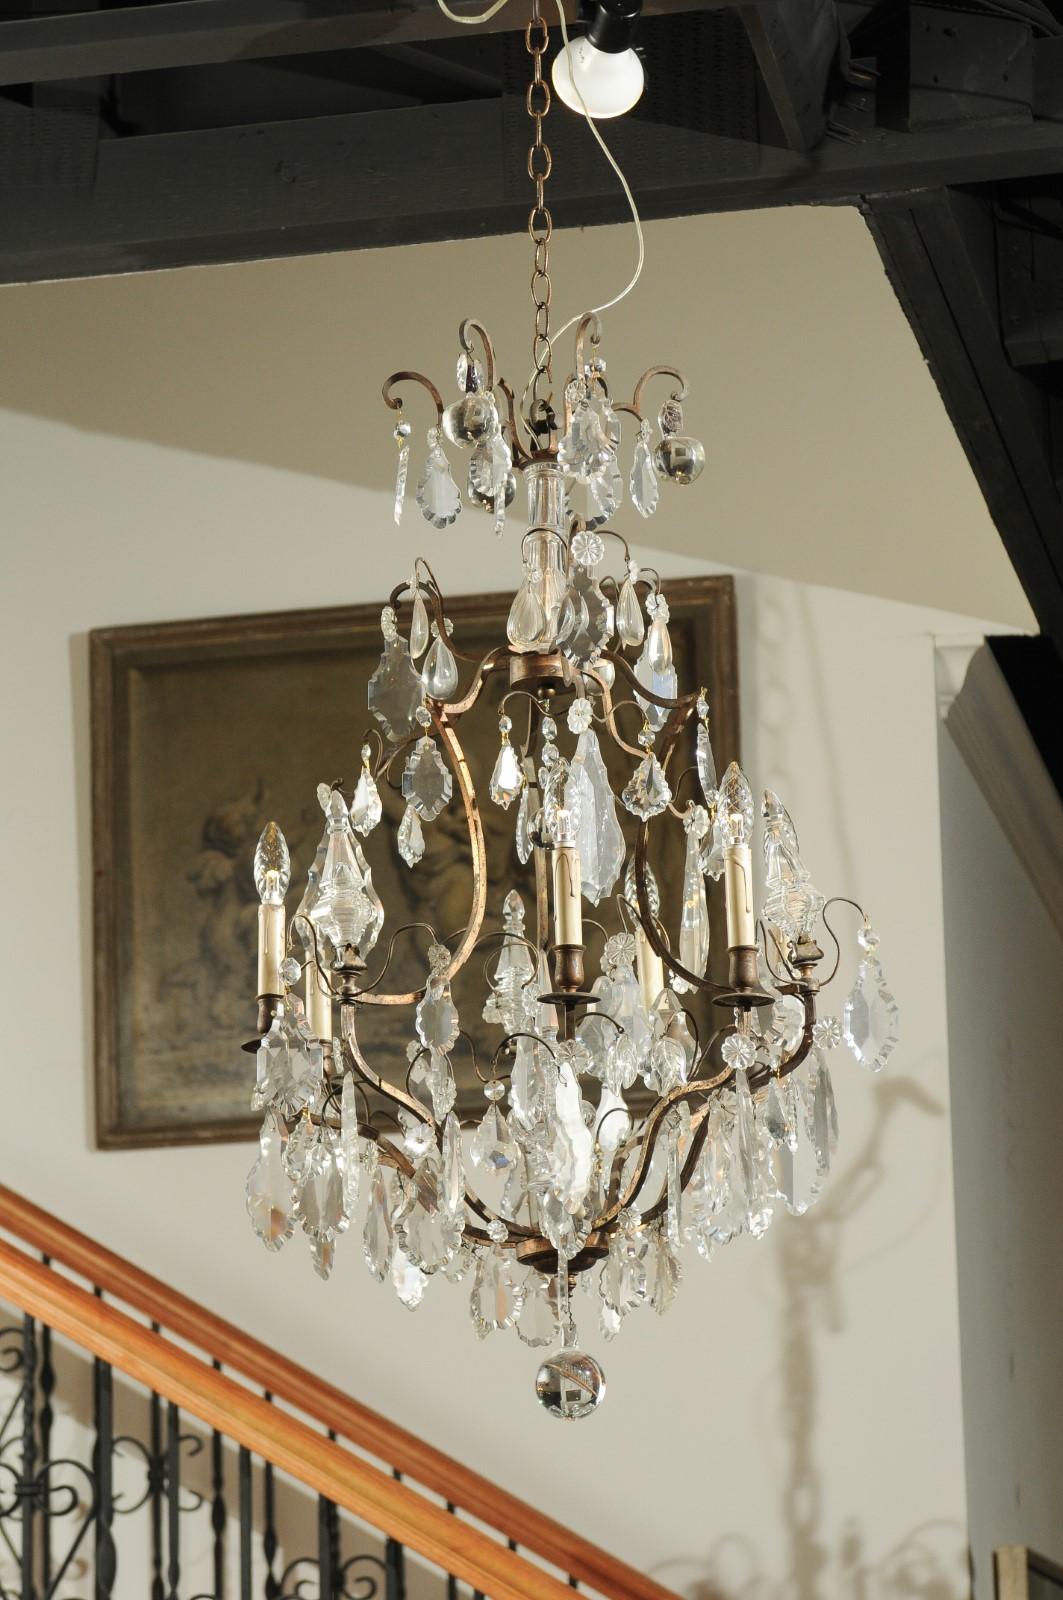 A French six-light crystal chandelier from the late 19th century, with iron armature and obelisks. Born in France during the Belle-Époque era, this exquisite six-light chandelier features a scrolling iron armature accented with pendeloques, rosettes